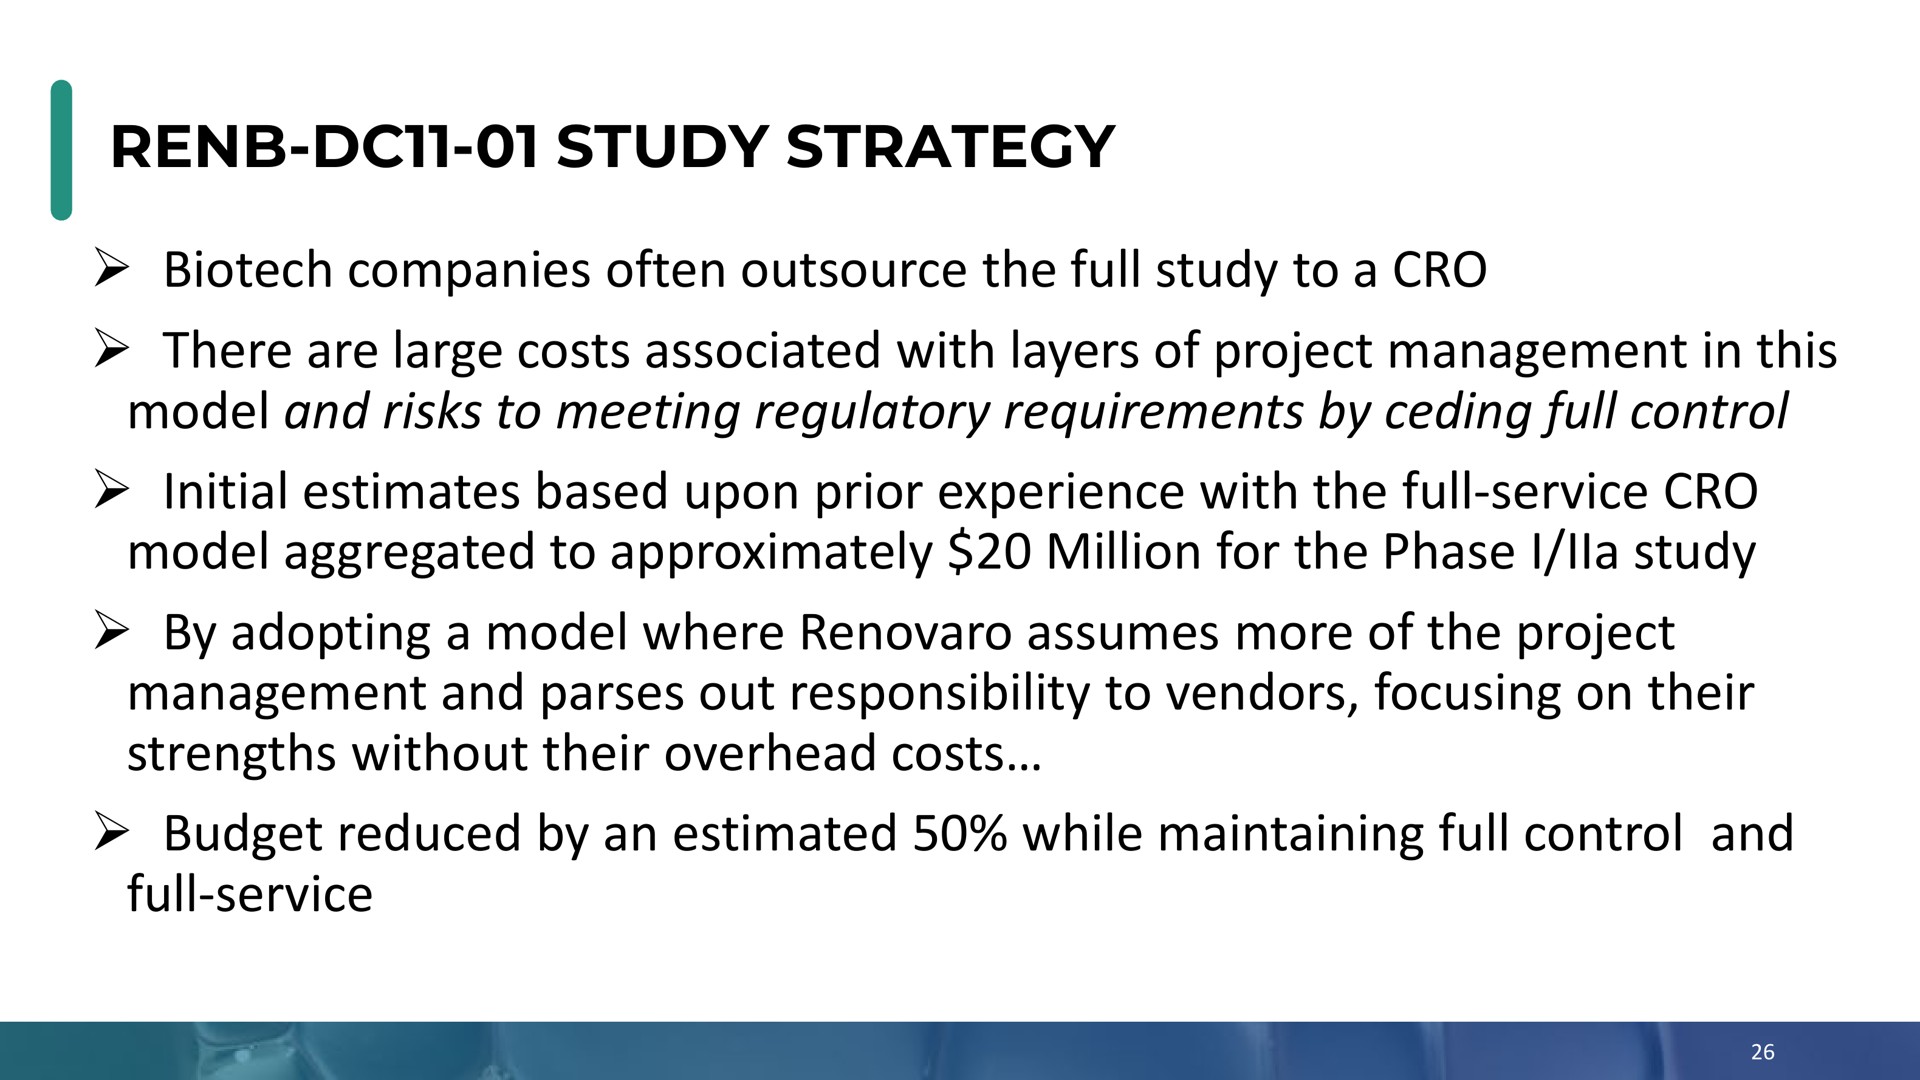 study strategy companies often the full study to a cro there are large costs associated with layers of project management in this model and risks to meeting regulatory requirements by ceding full control initial estimates based upon prior experience with the full service cro model aggregated to approximately million for the phase i study by adopting a model where assumes more of the project management and parses out responsibility to vendors focusing on their strengths without their overhead costs budget reduced by an estimated while maintaining full control and full service | Enochian Biosciences